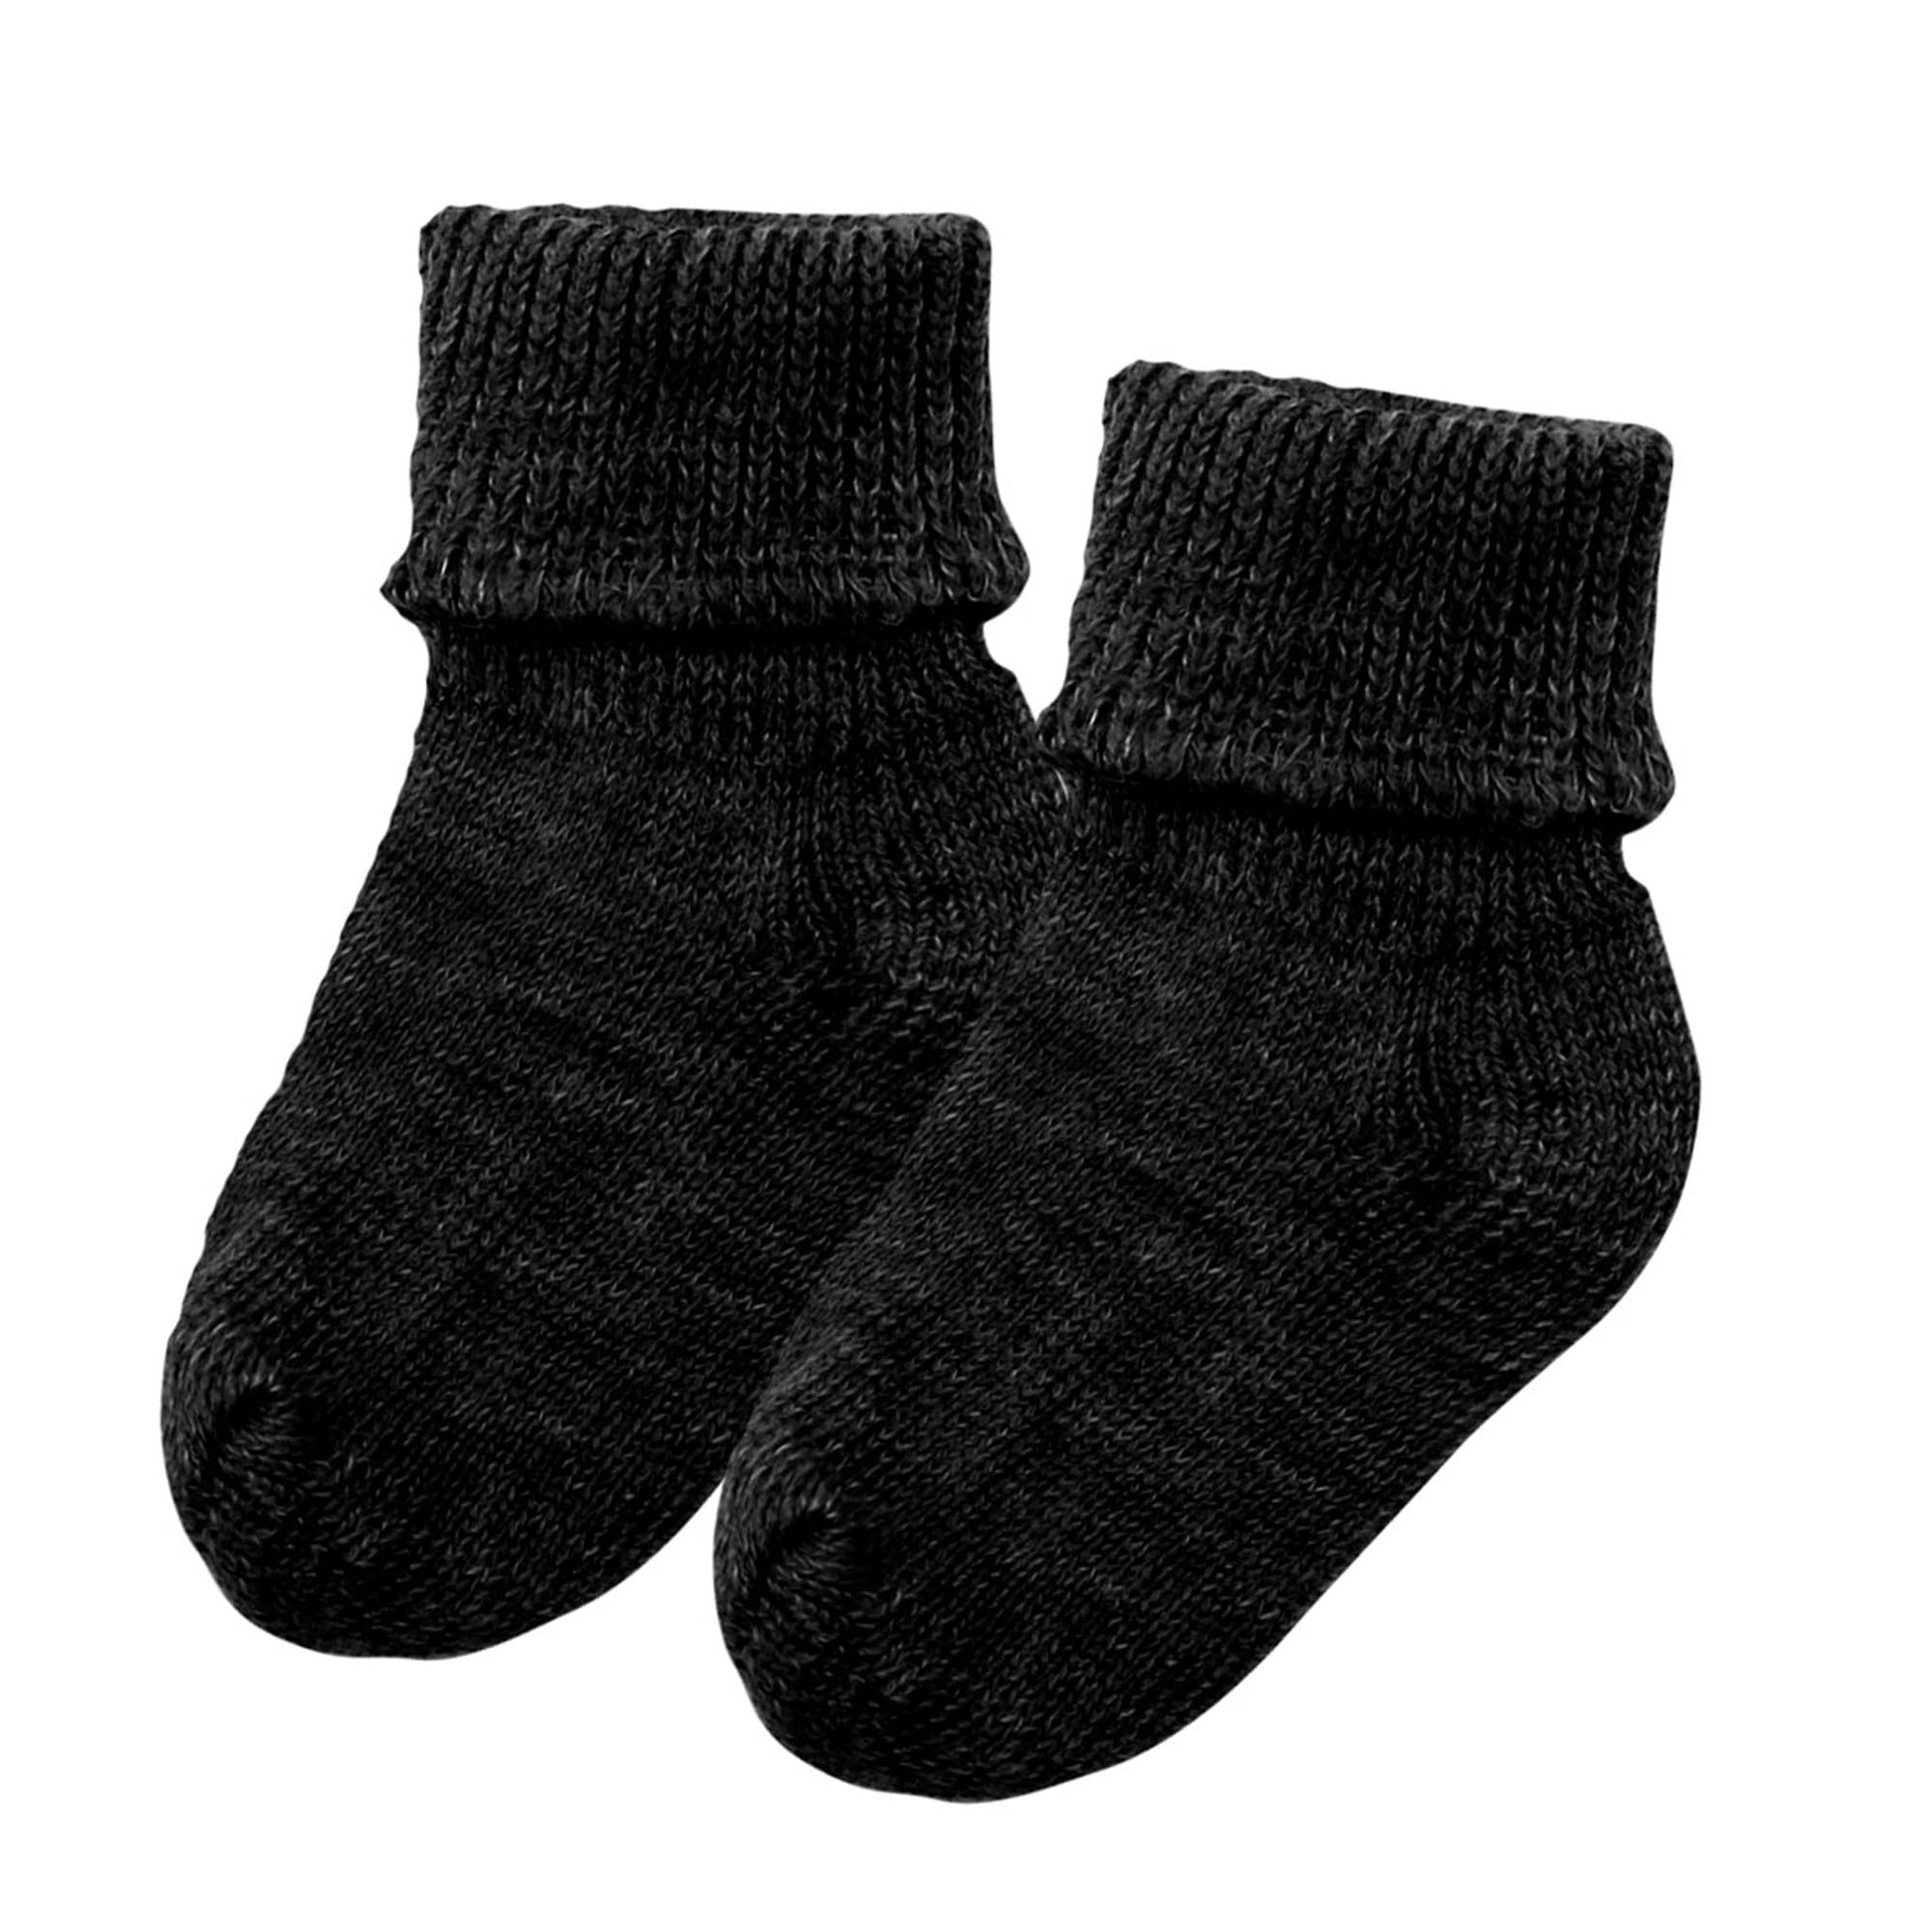 Sophia’s Solid Colored Basic Mix & Match Scrunchy Knit Pair of Ankle Socks for 18” Dolls, Black